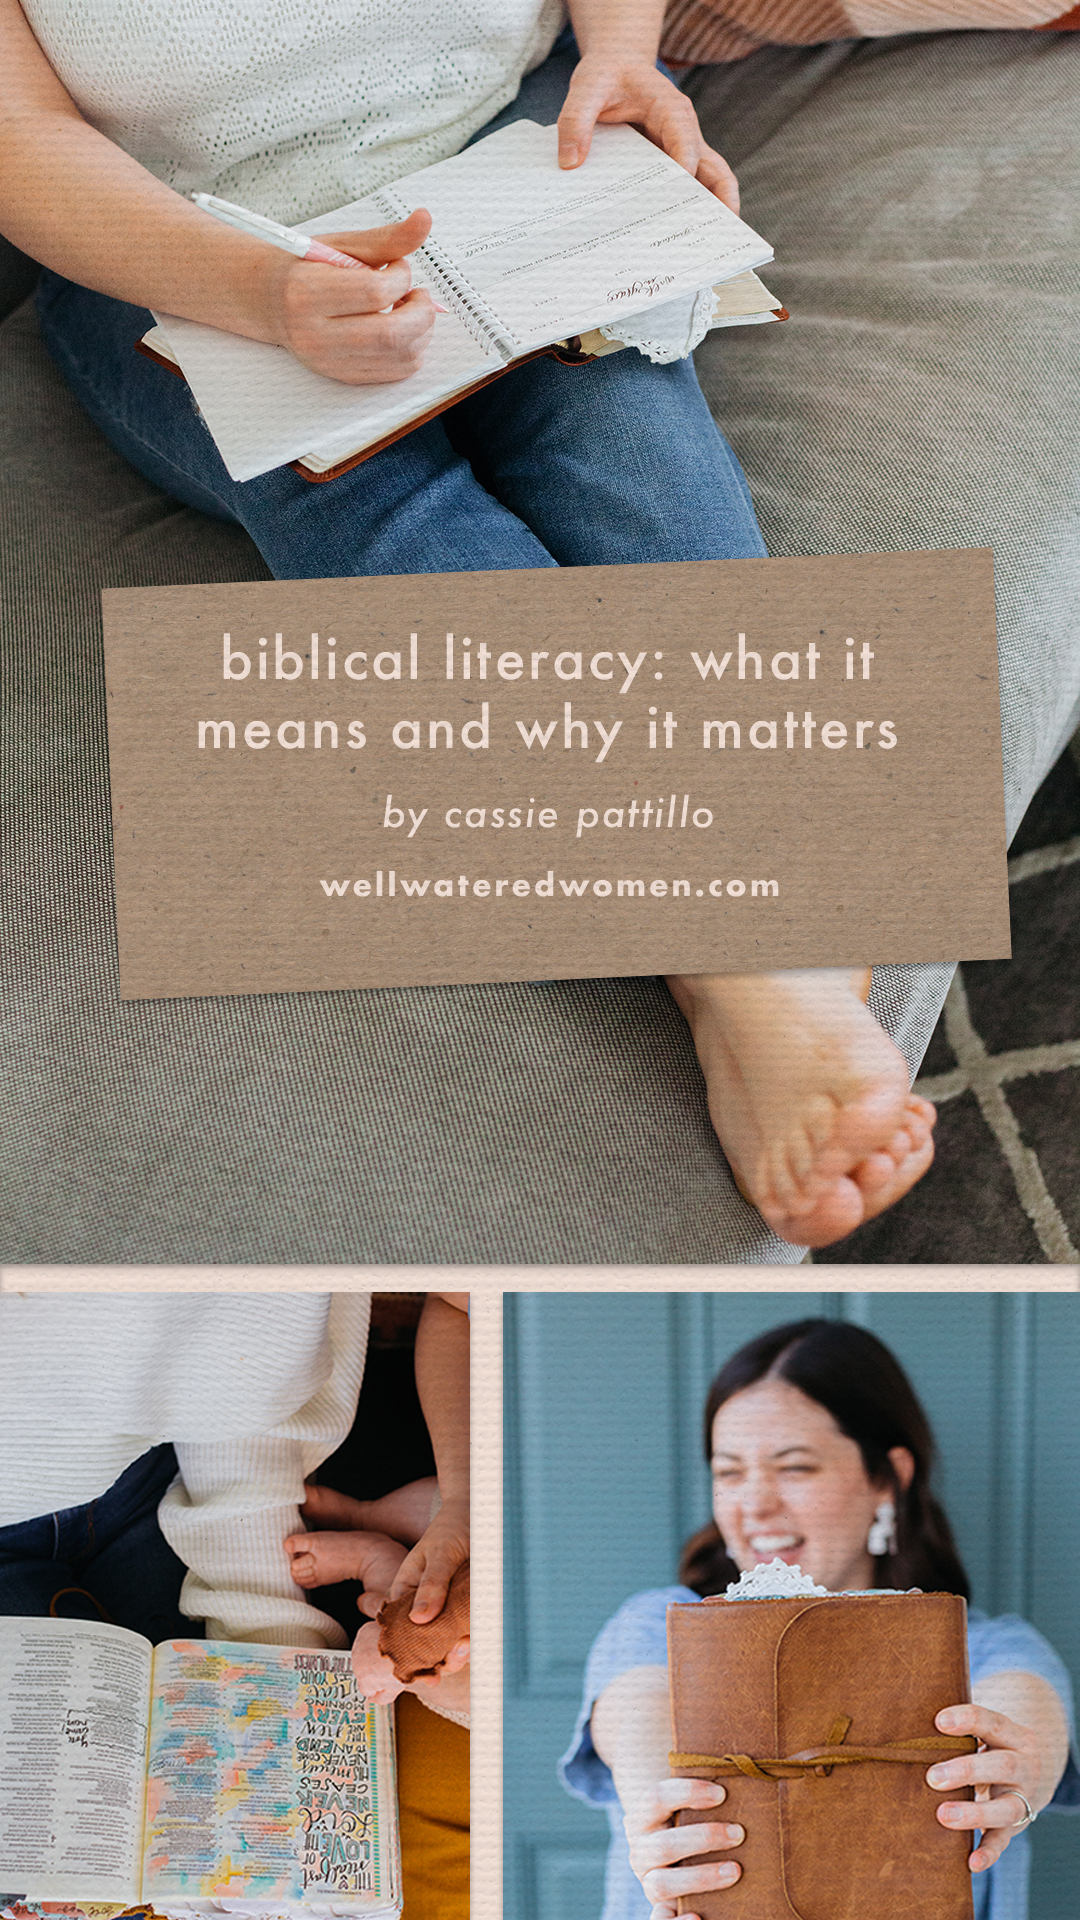 Well-Watered Women Blog | Biblical Literacy - What Does It Mean and Why Does It Matter?